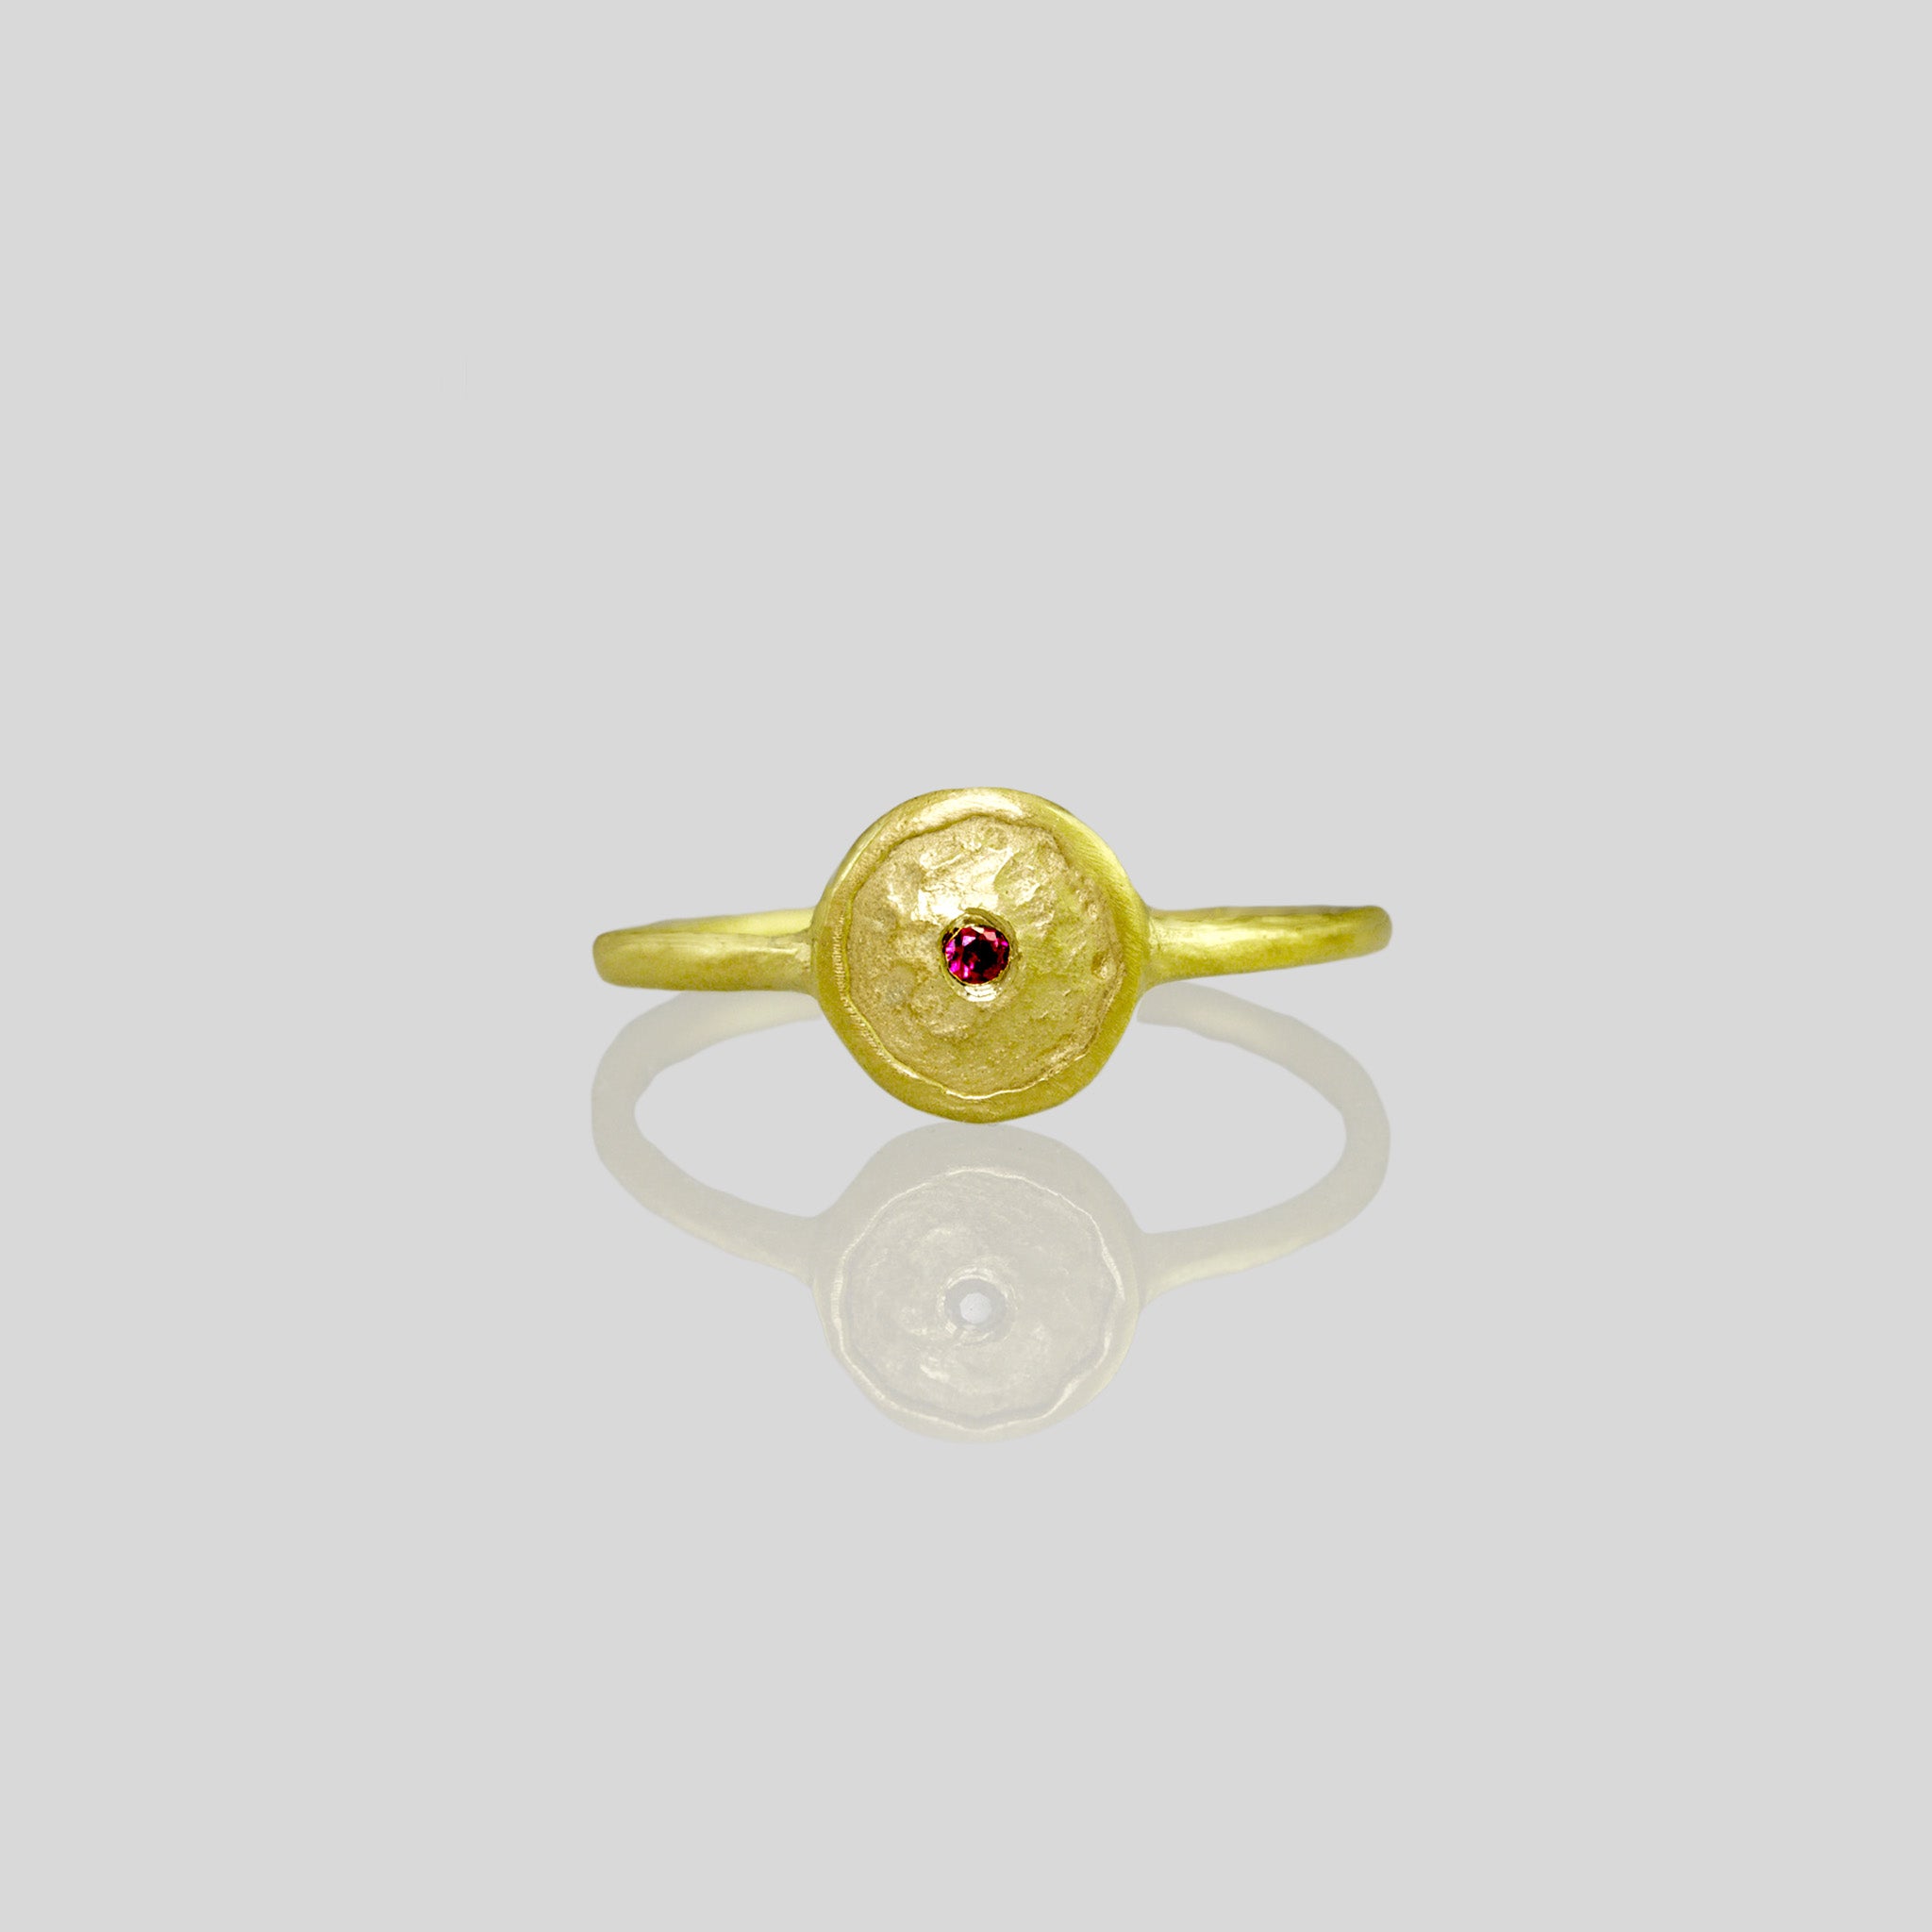 Front view of an Hand-crafted 18k Gold Ring with a small Ruby set in the center of a circular plate, resembling a shining star in the sky. Delicate and elegant, radiating brilliance.